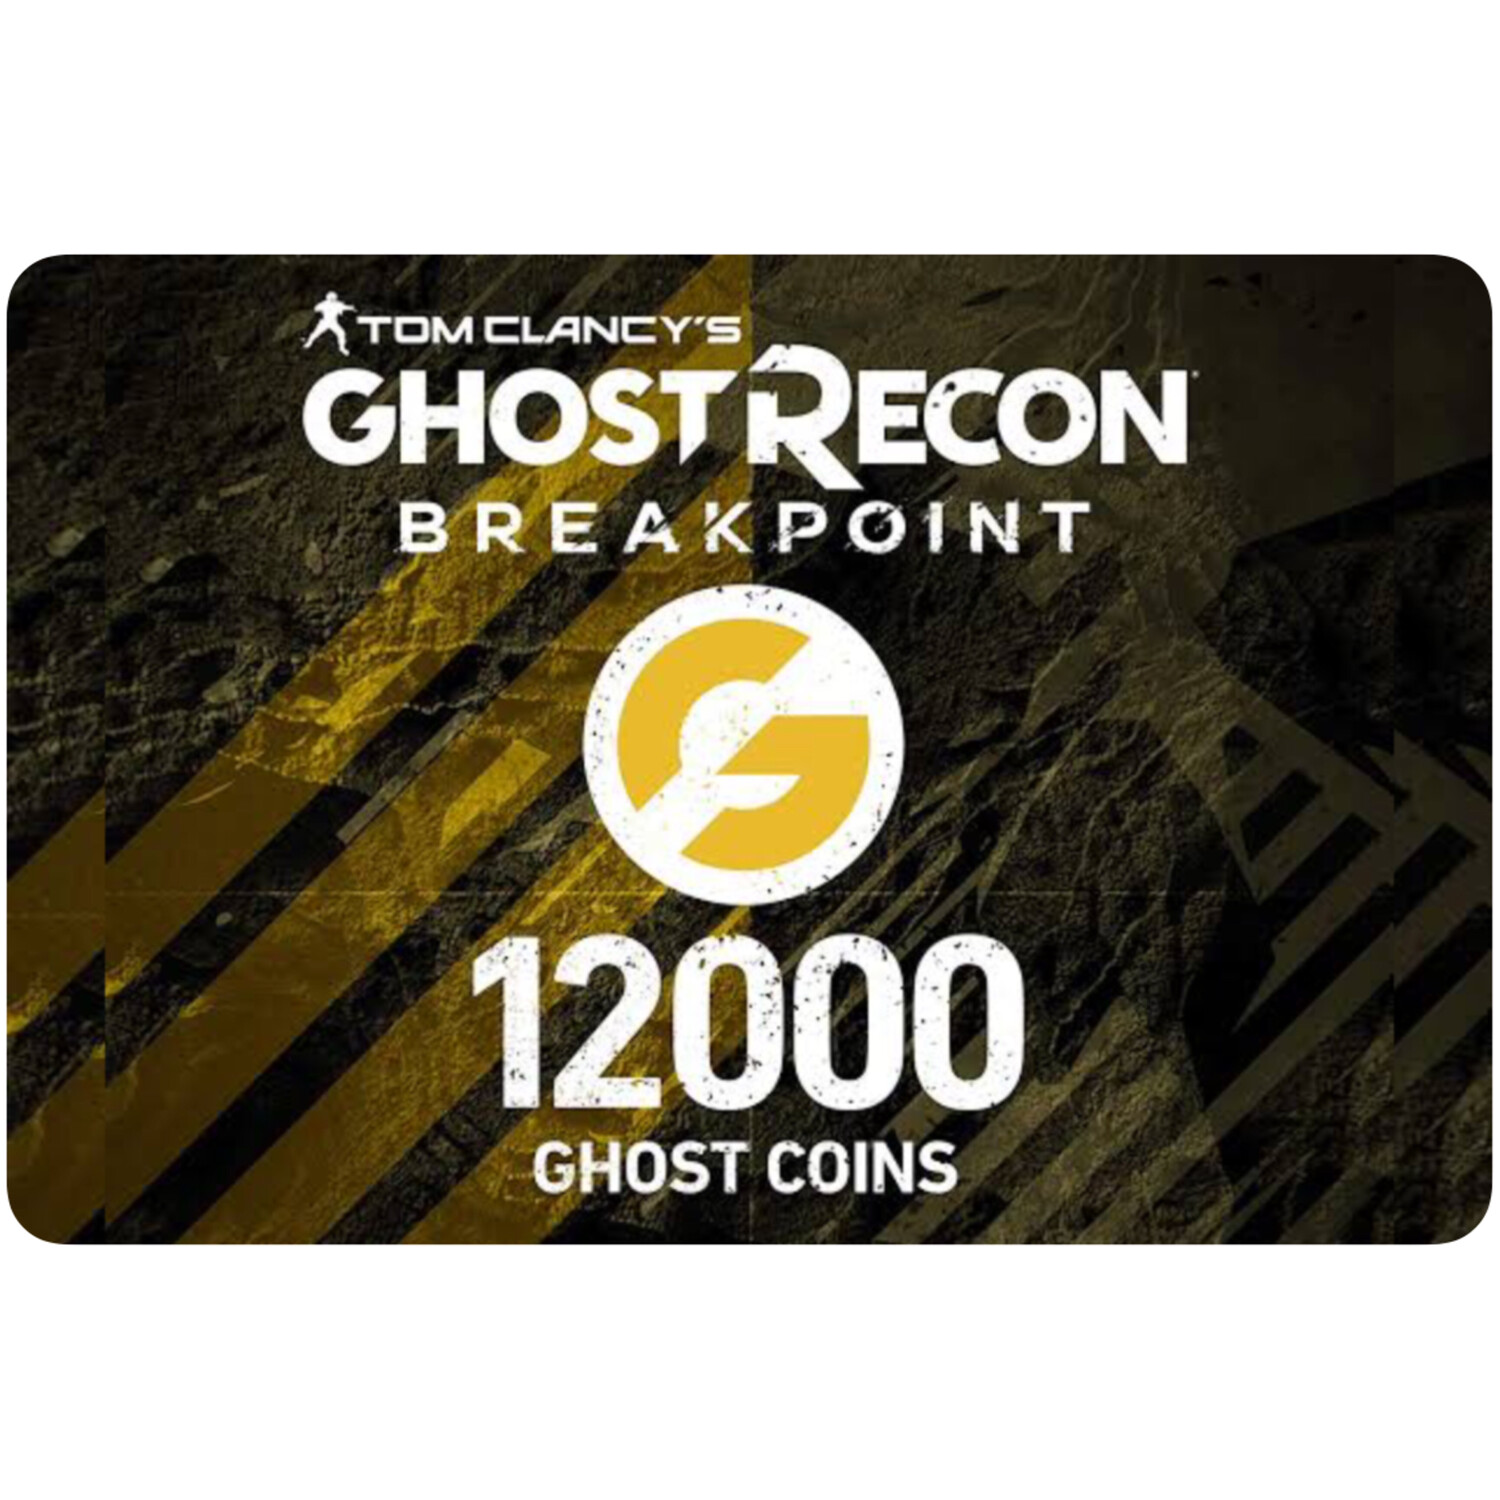 Tom Clancy Ghost Recon Breakpoint: 12000 Ghost Coins for Playstation